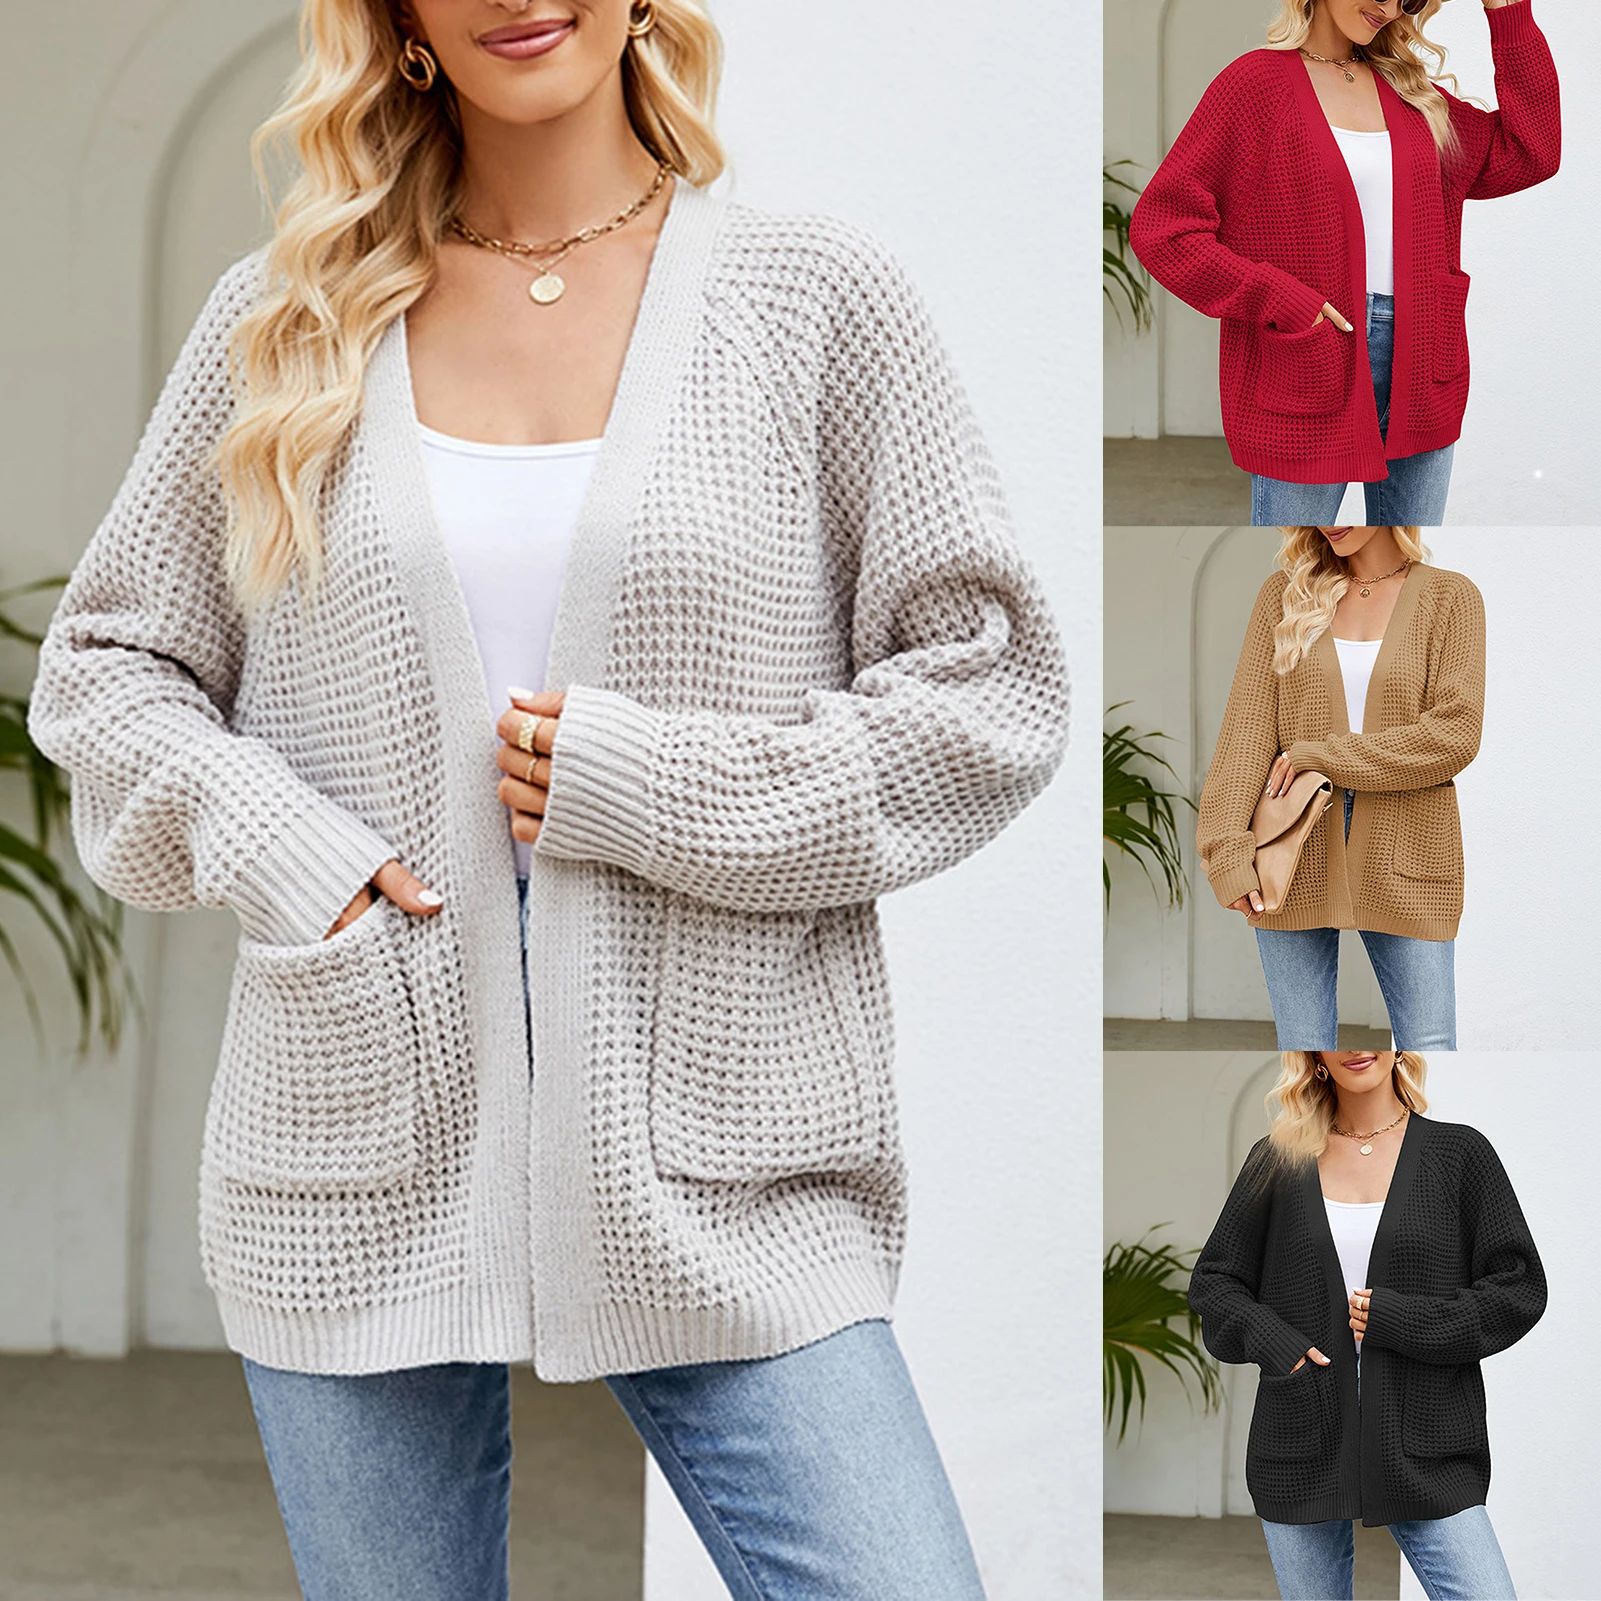 

Open Front Coats for Woman Autumn Winter Fashion Outerwears Casual Comfy Cardigans Retro Crochet Elegant Sweaters with Pockets